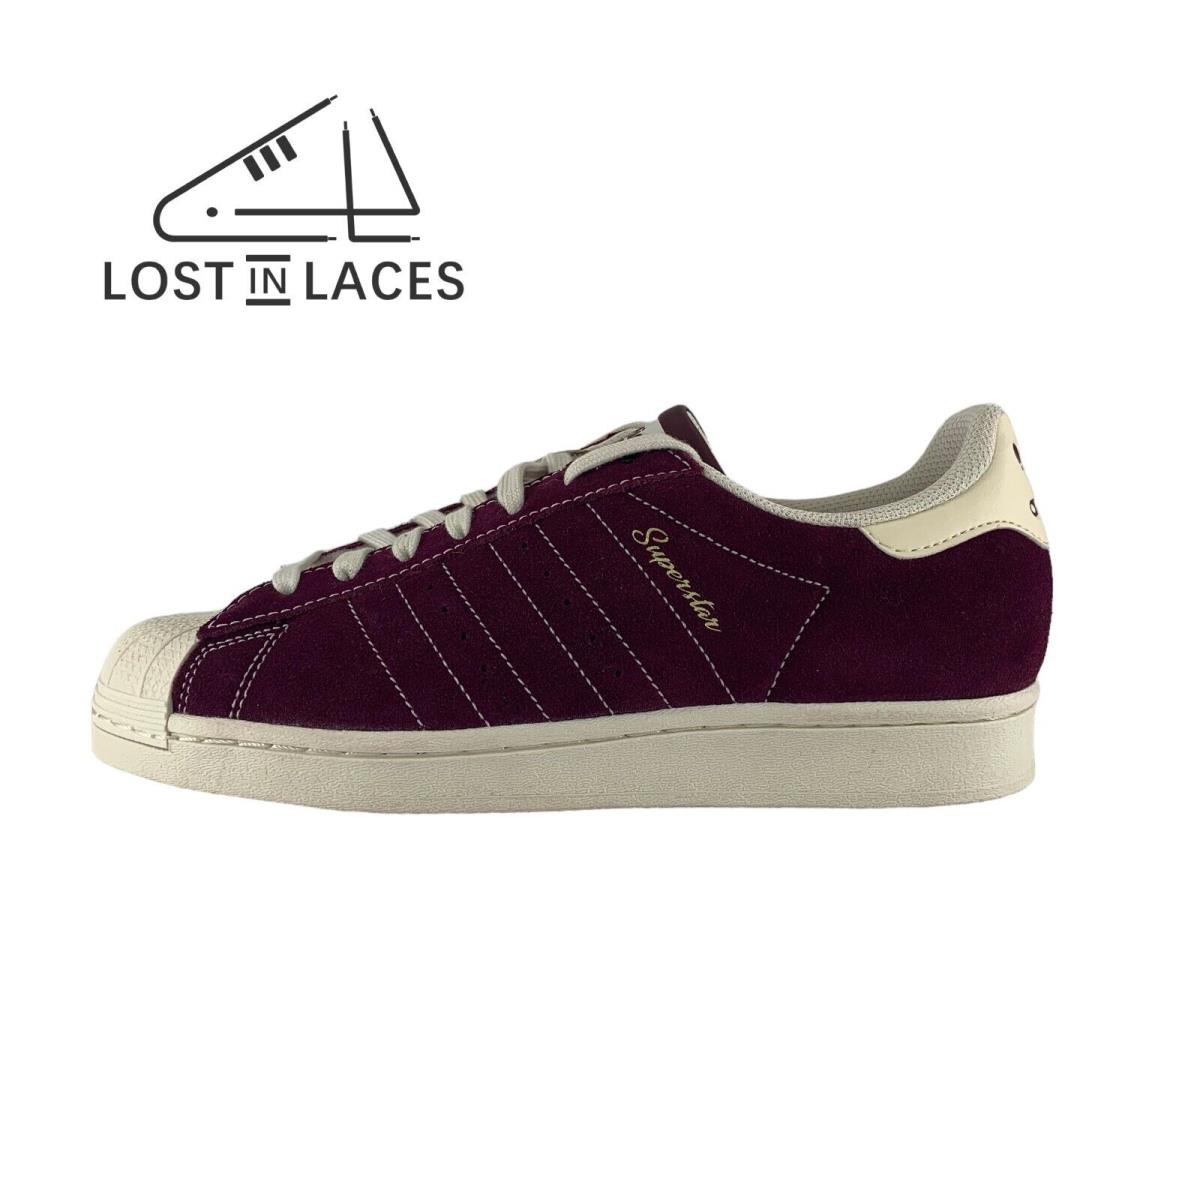 Adidas Superstar Fine Form Maroon Sneakers Women`s Shoes IF7676 - Red